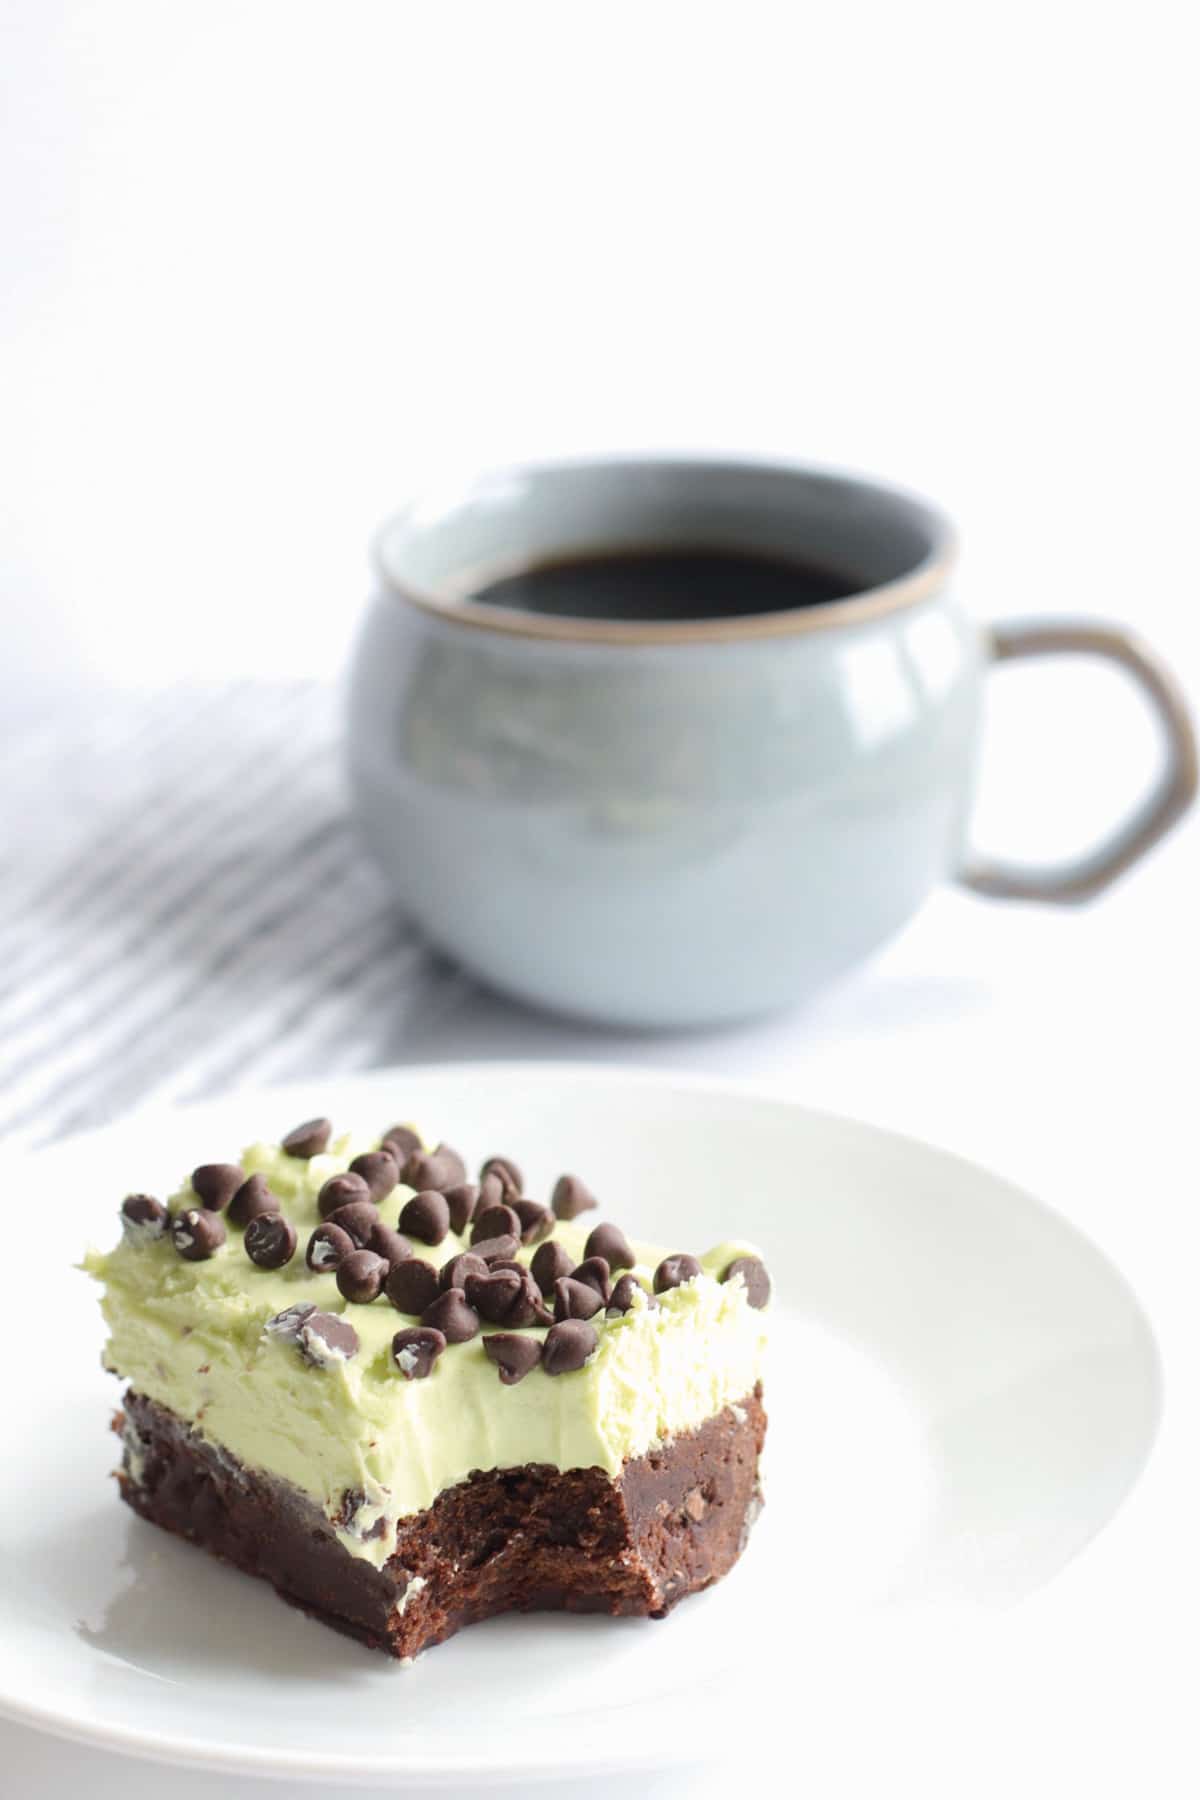 mint chocolate chip brownie on a plate with a cup of coffee